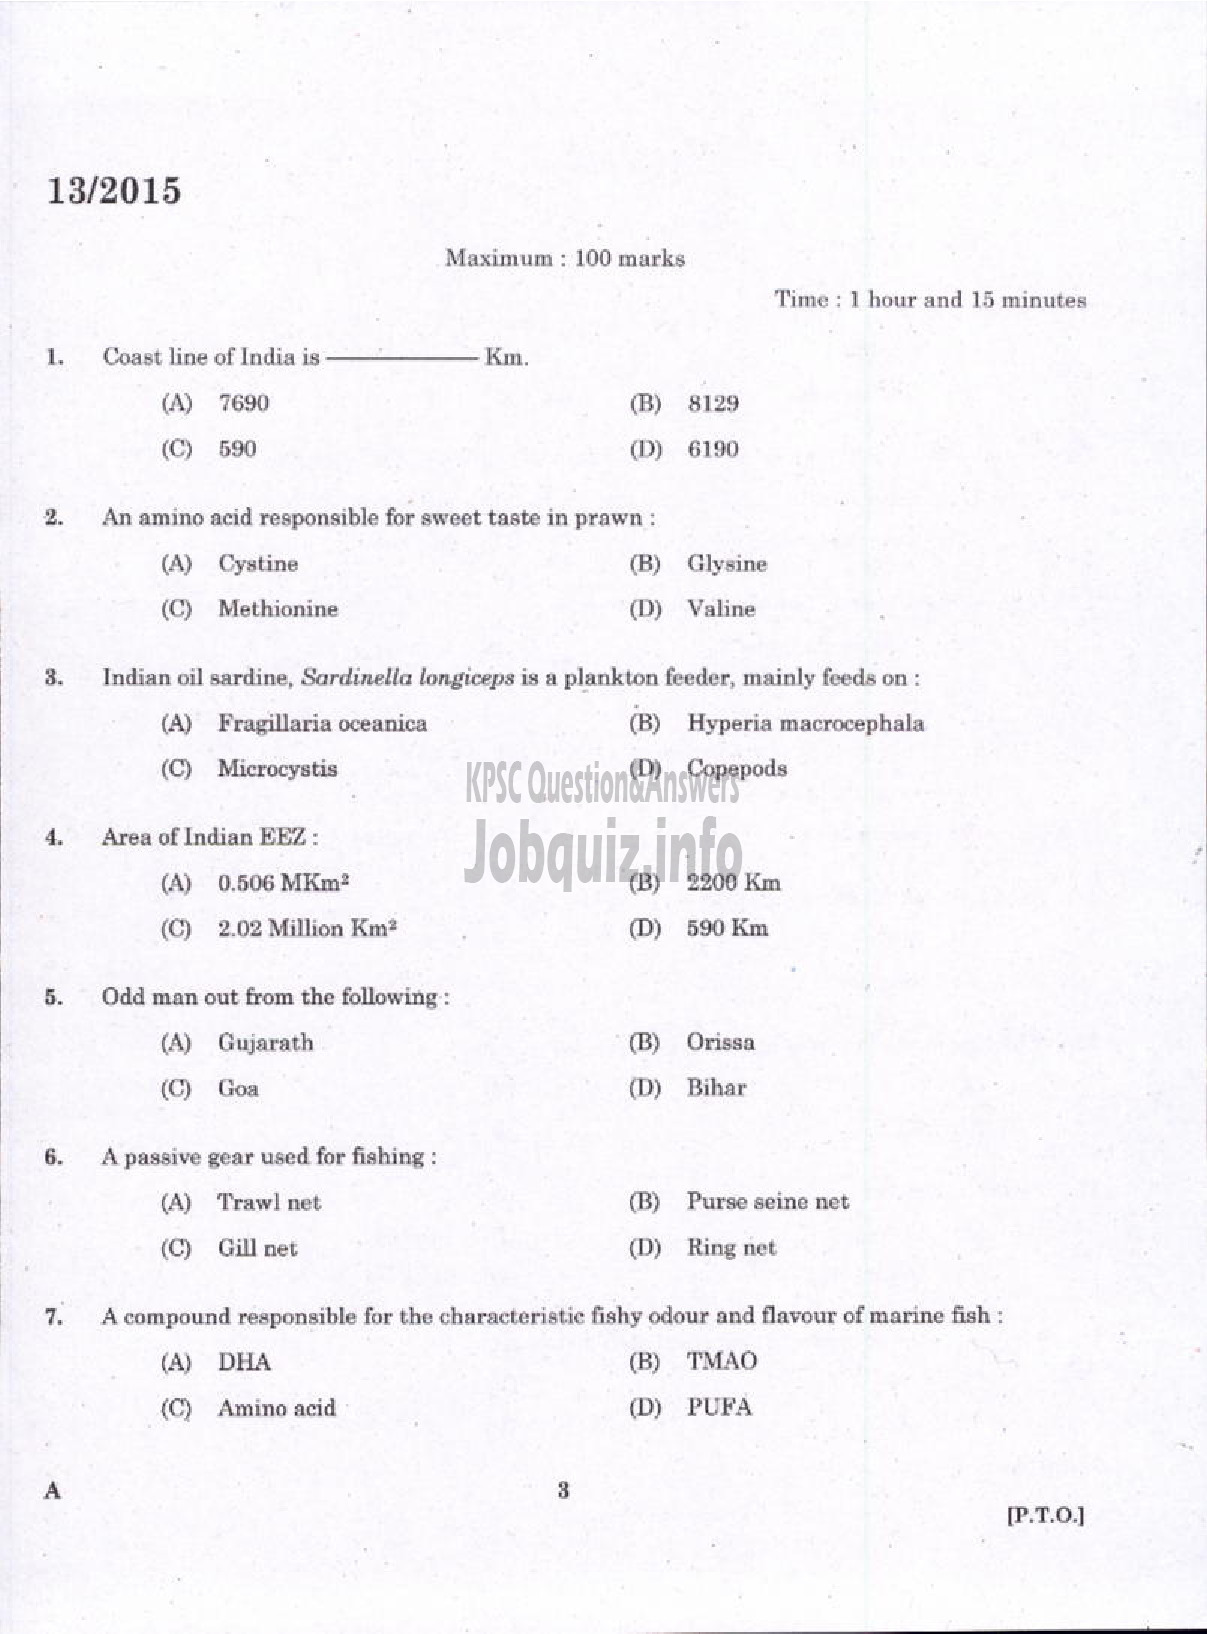 Kerala PSC Question Paper - LABORATORY TECHNICAL ASSISTANT FISHERIES FISH PROCESSING TECHNOLOGY VOCATIONAL HIGHER SECONDARY EDUCATION-1